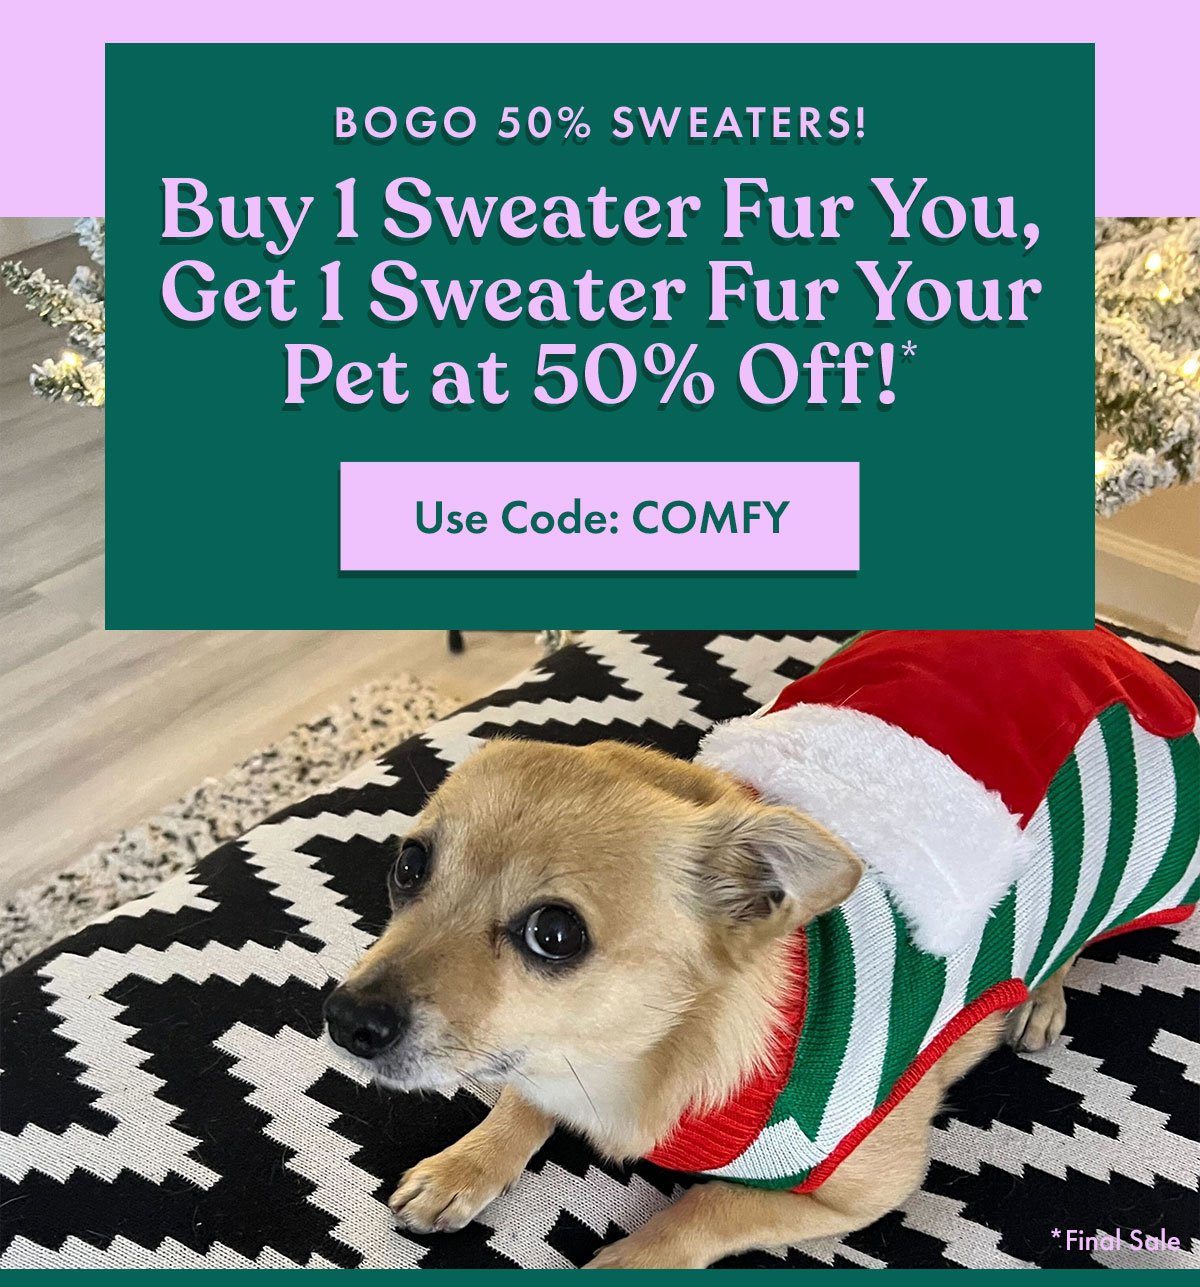 BOGO 50% Sweaters! | Buy 1 Sweater Fur You, Get 1 Sweater Fur Your Pet at 50% Off!